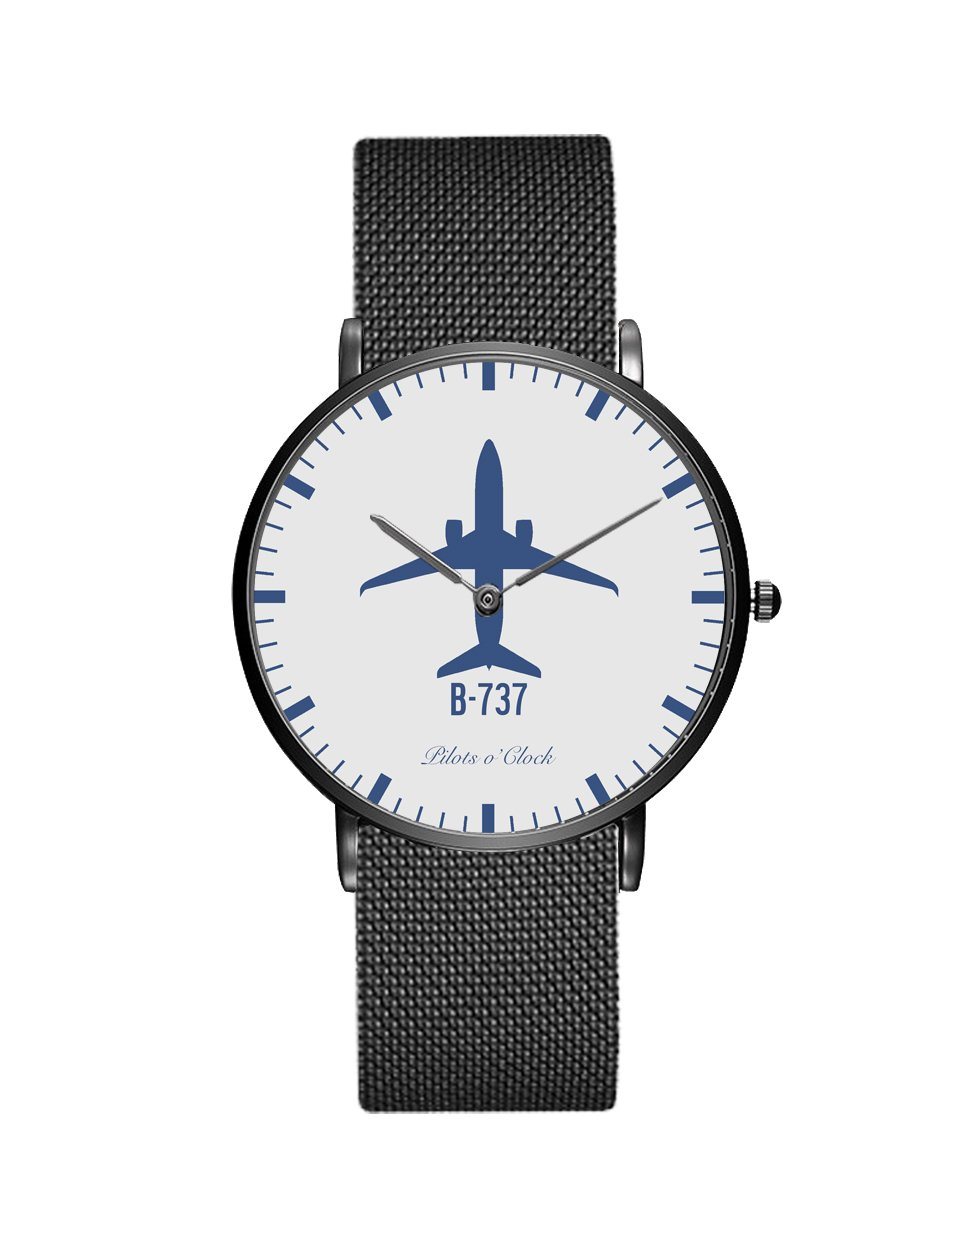 Boeing 737 Stainless Steel Strap Watches Pilot Eyes Store Black & Stainless Steel Strap 